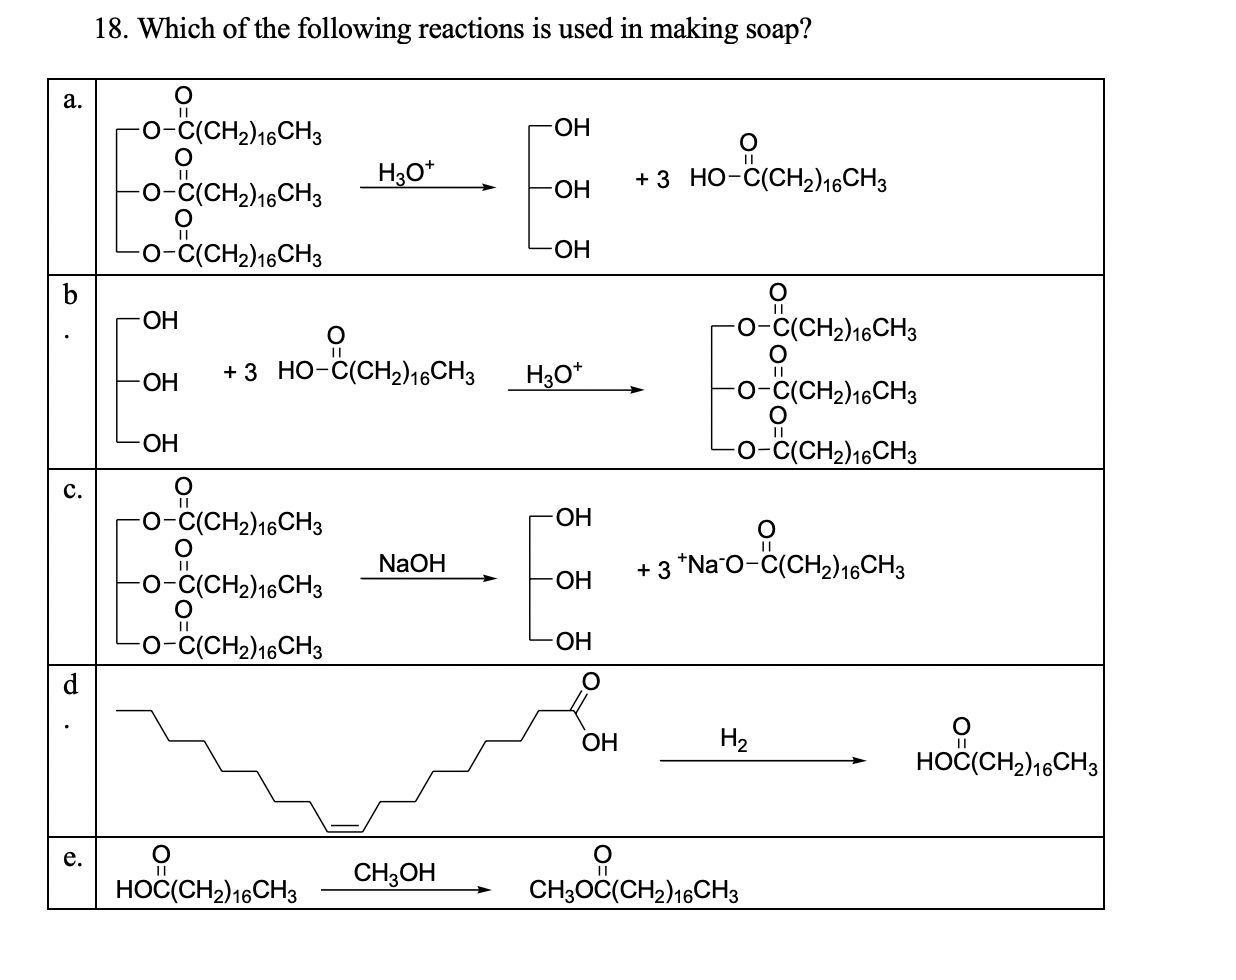 18. Which of the following reactions is used in making soap?
a.
o-C(CH2)16CH3
ОН
H3O*
+3 Но-с(СH2)CHз
-о-с(CH2)16CHз
-ОН
-o-č(CH2)16CH3
HO-
b
ОН
-C(CH2)16CH3
ОН
+3 но-С(СH2)16CH3
Hзо*
-0-C(CH2)16CH3
-o-ċ(CH,)1¢CH3_
-ОН
o-C(CH2)16CH3
HO-
NaOH
+ 3 *Na o-C(CH,)16CH3
0-C(CH2)16CH3
HO-
-0-C(CH2)16CH3
-ОН
HočICHsmCH,
ОН
Н2
ноС(СH)16СH3
носснсн, —снон
сноссннсн,
e.
ноС(CH)16СHз
CH;OH
CH;OČ(CH2)16CH3
